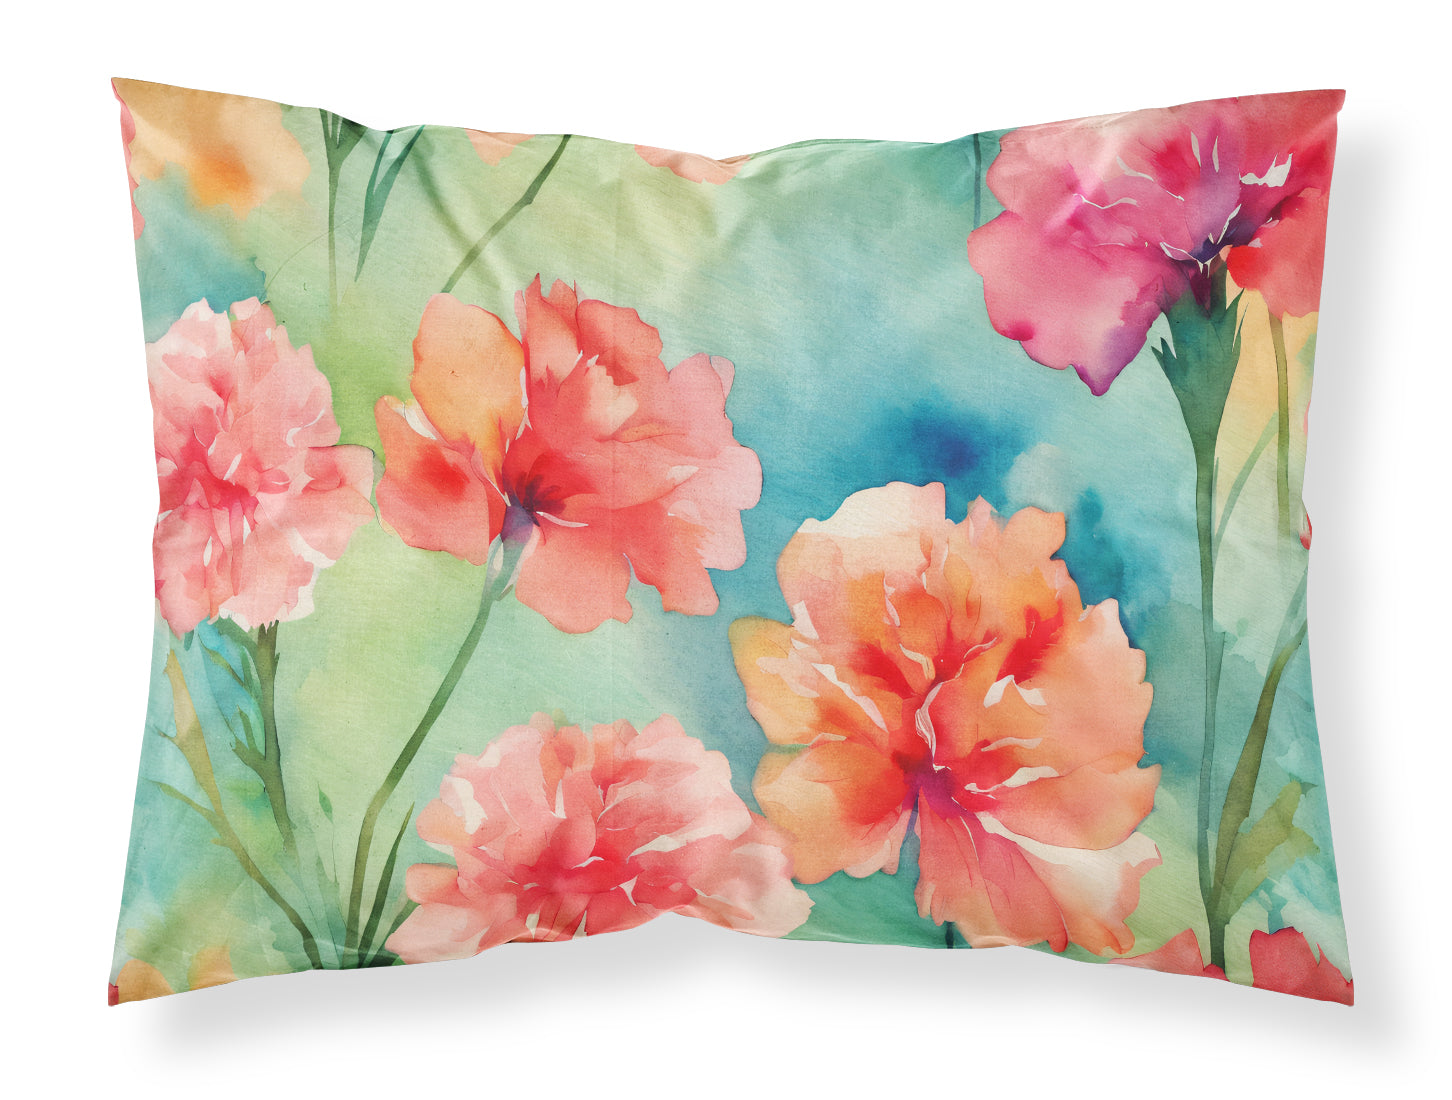 Buy this Carnations in Watercolor Fabric Standard Pillowcase